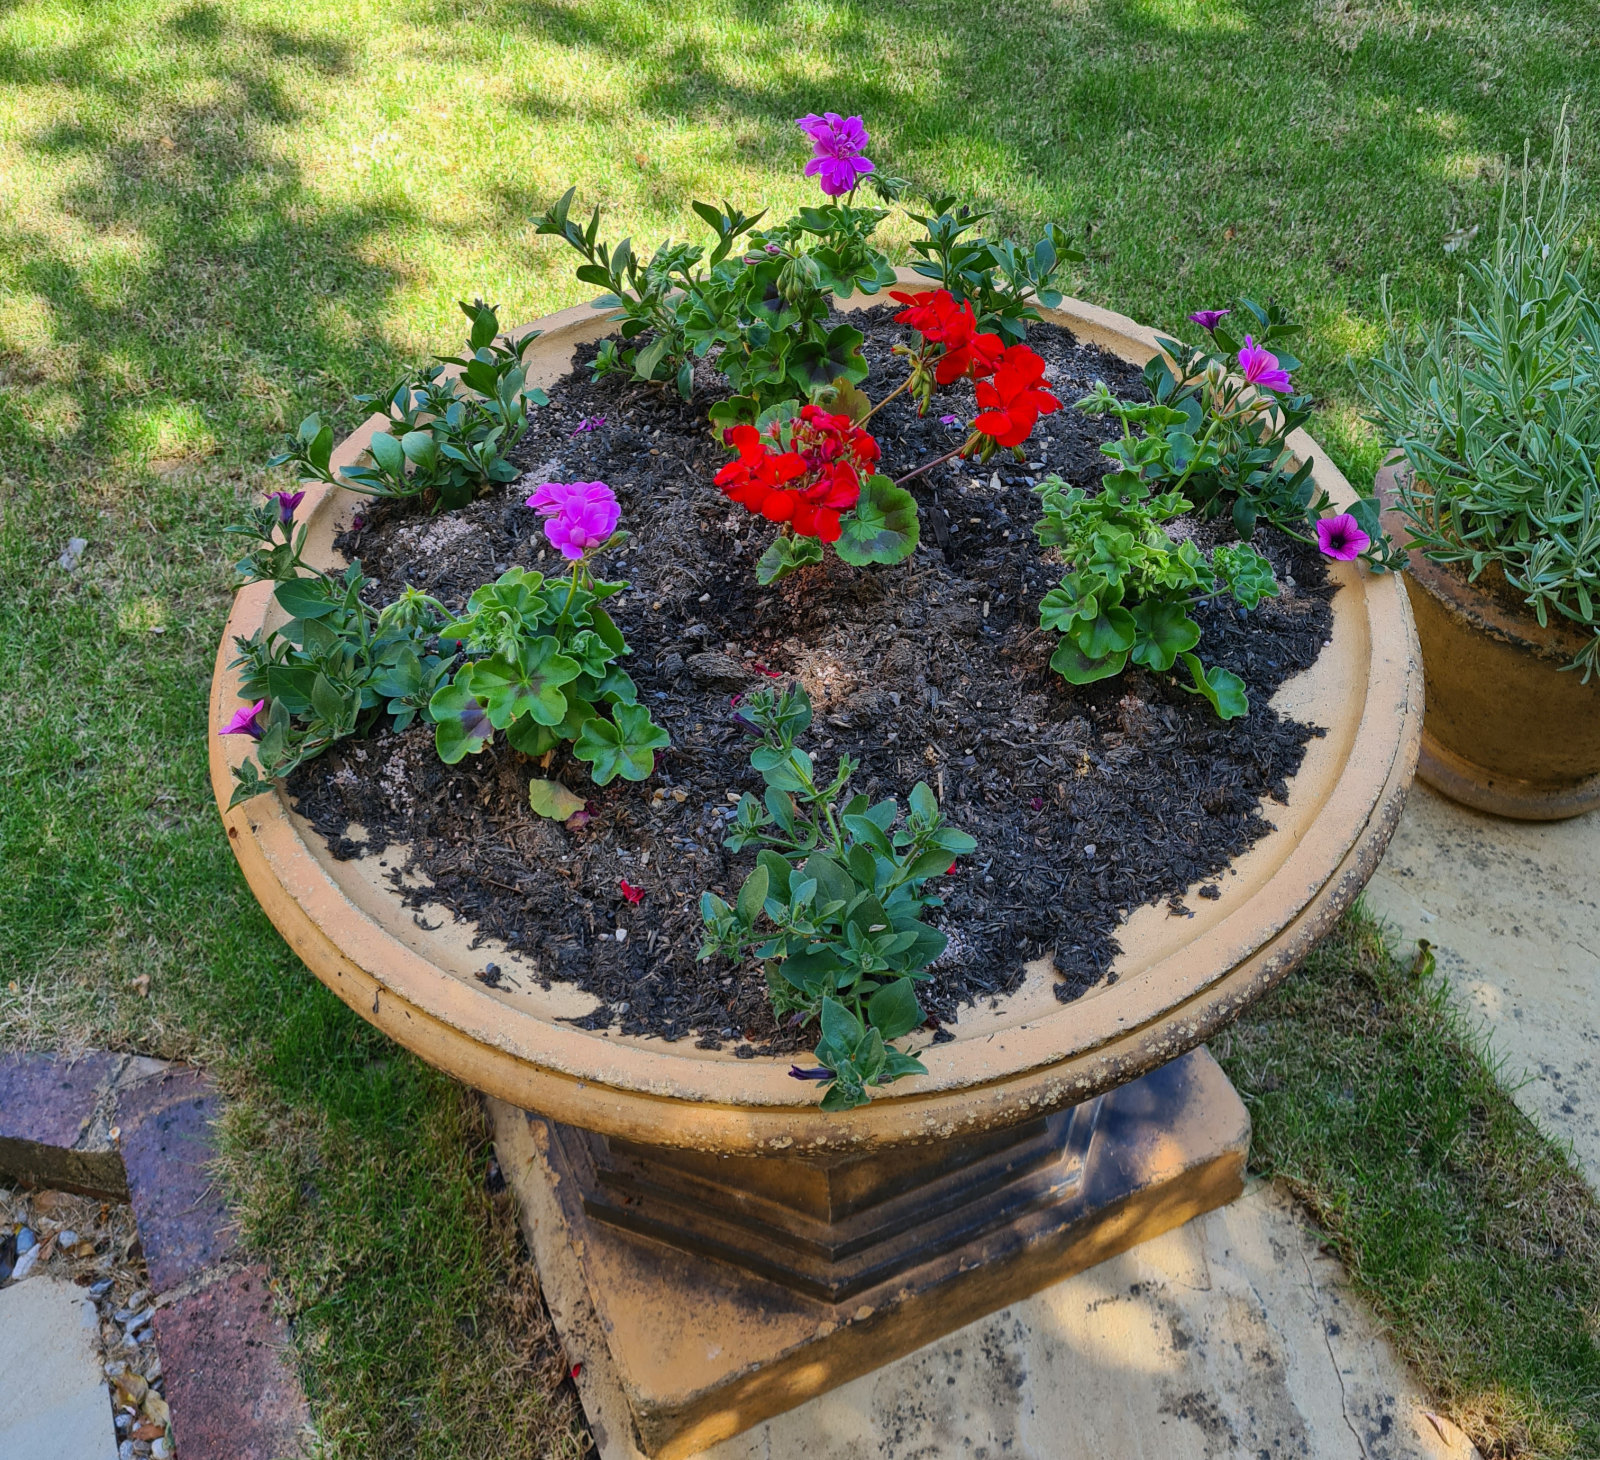 petunias in a pot, just planted